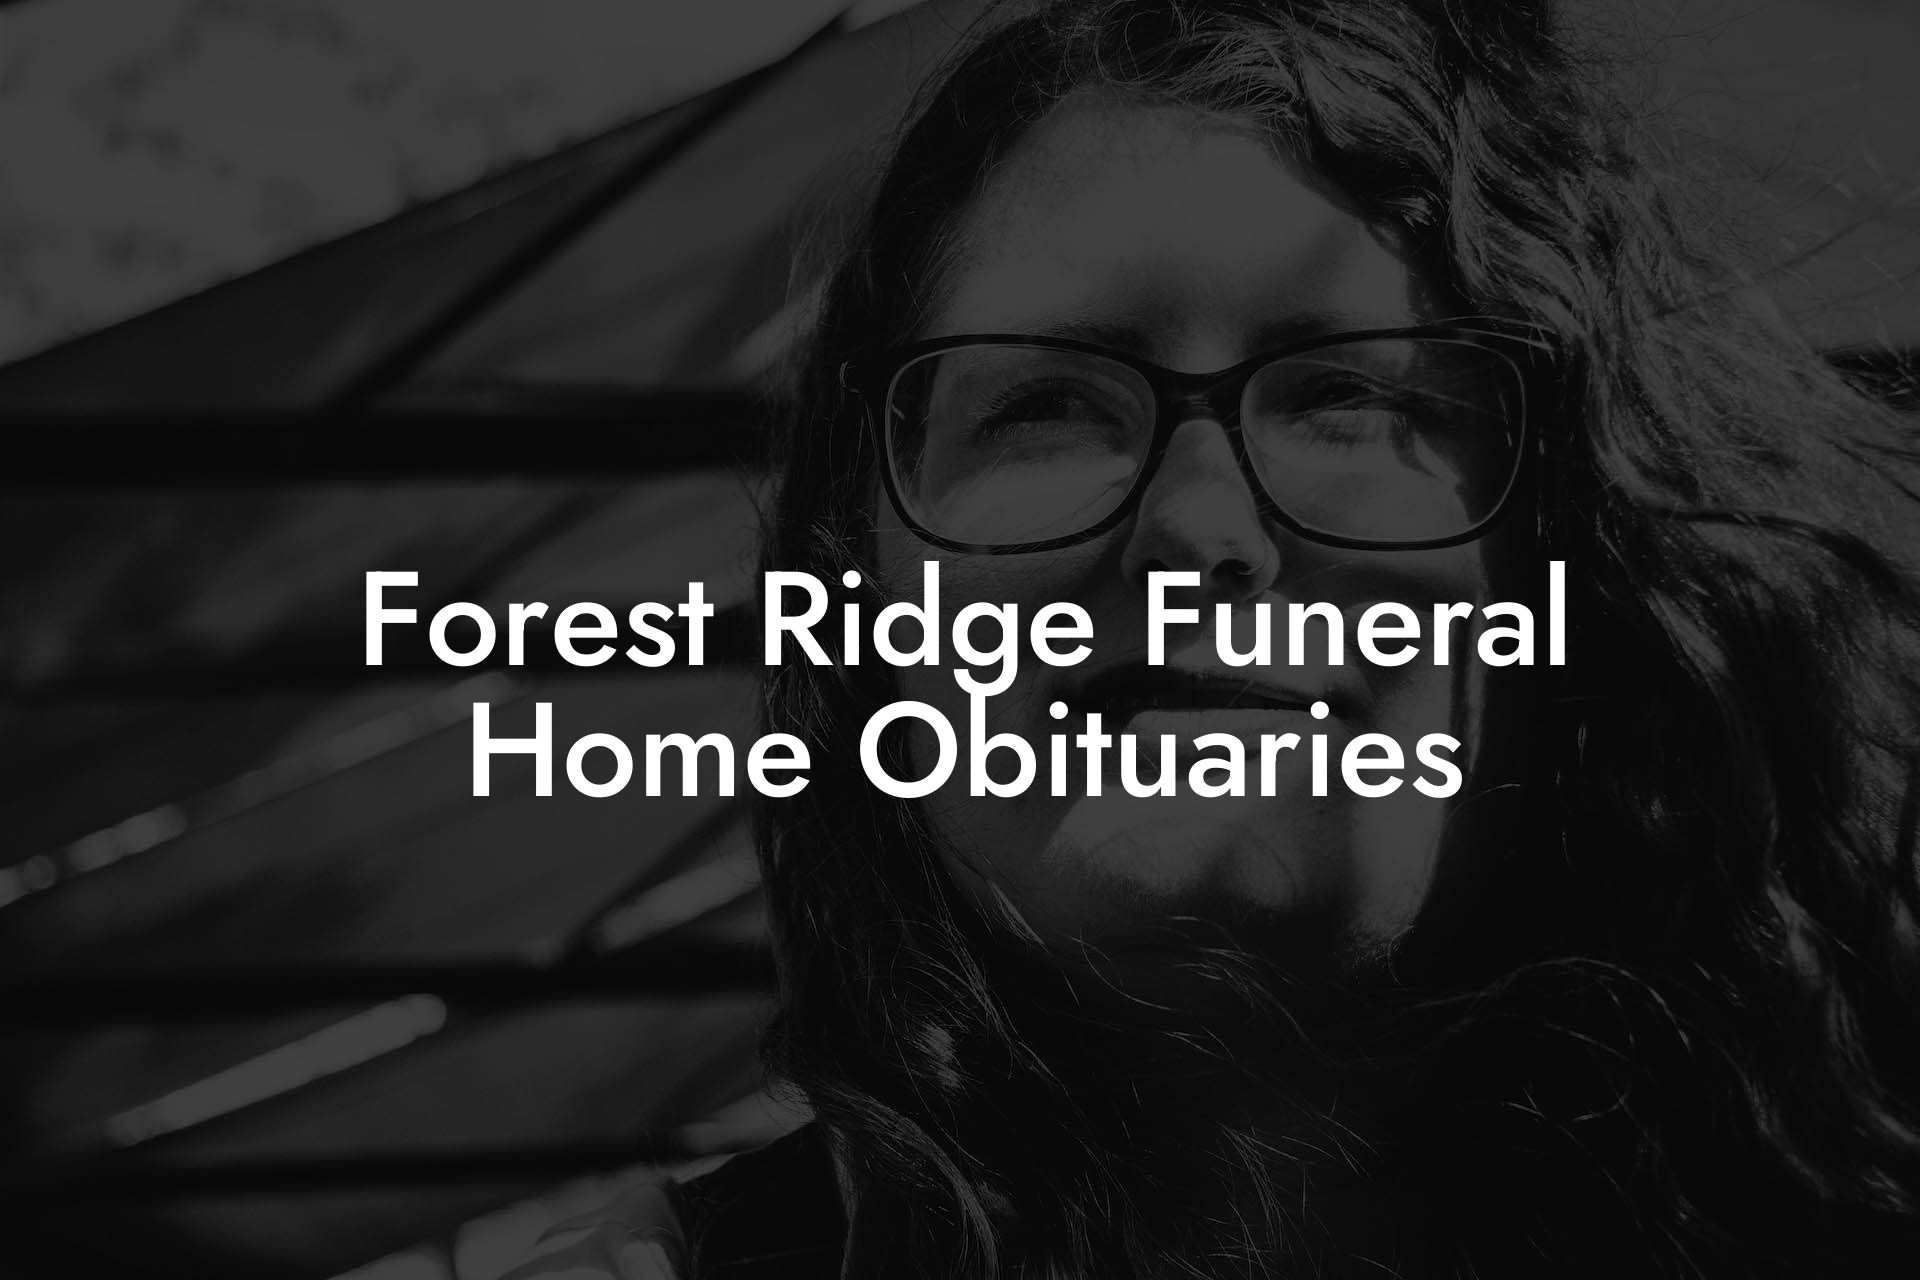 Forest Ridge Funeral Home Obituaries